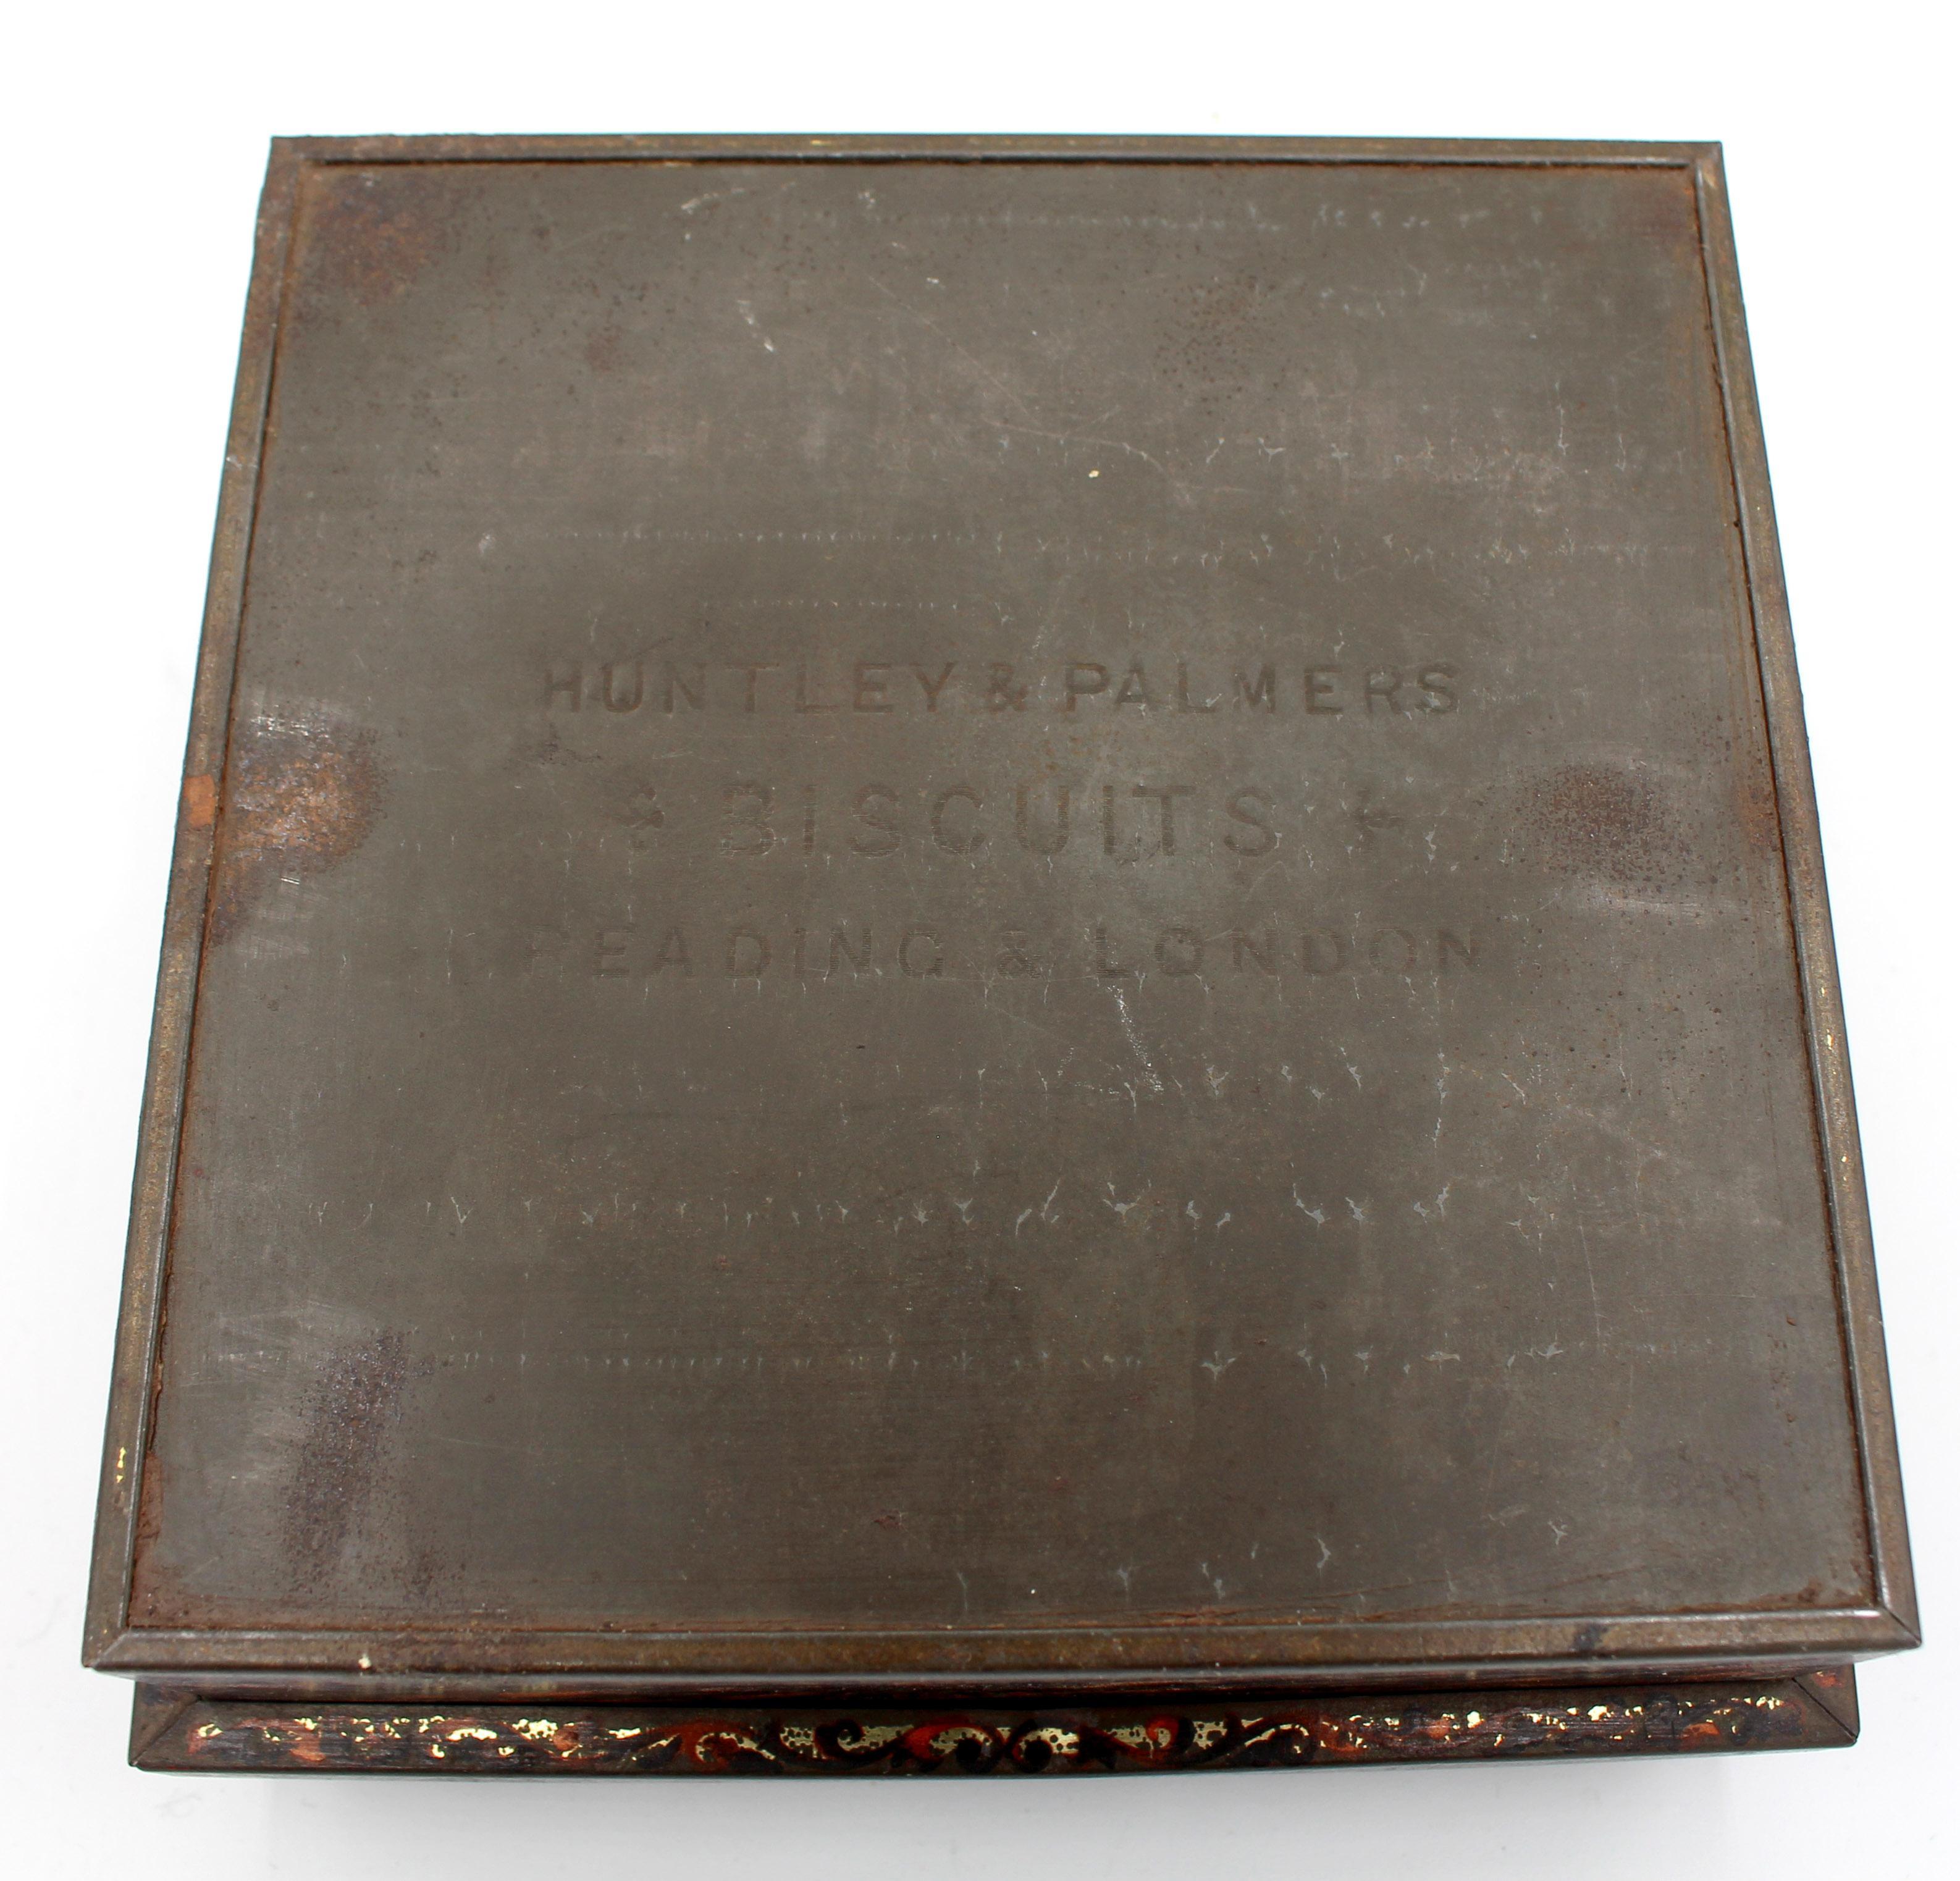 1904 Huntley & Palmers Faux Boulle Biscuit Tin Box For Sale 1